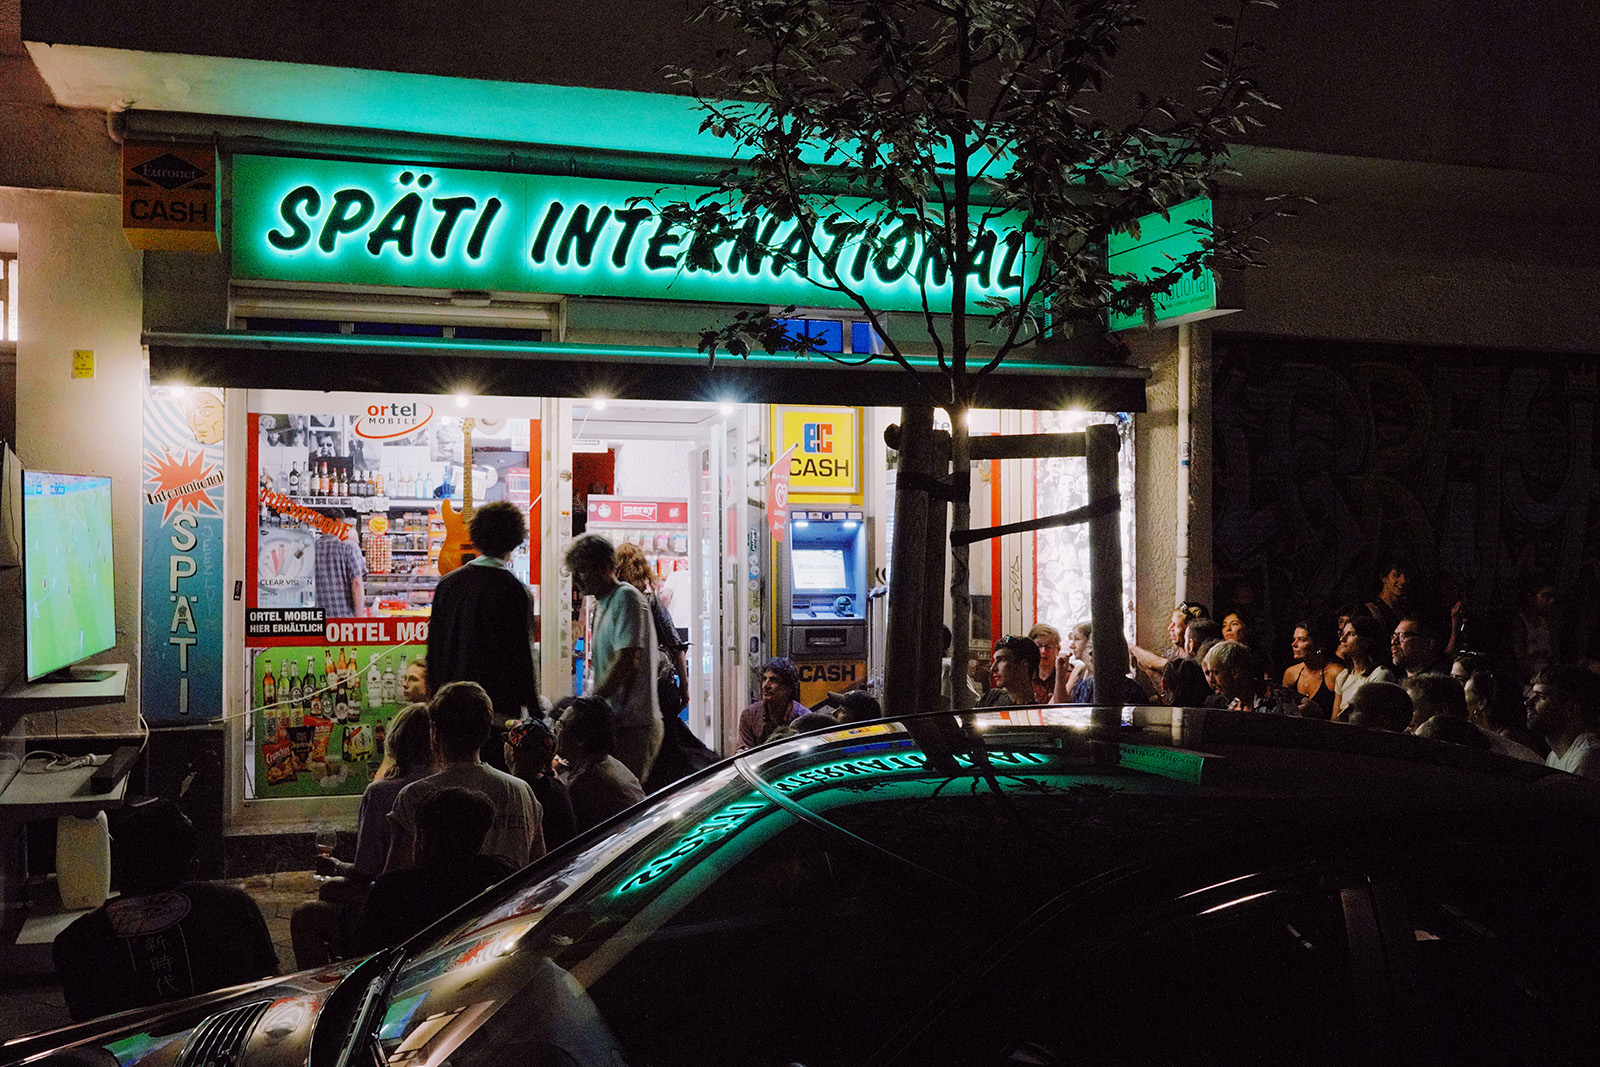 Fans gather to watch a Euro 24 game at Späti International on Weserstraße, Neukölln. Photography for Hyphen by Muhammad Salah